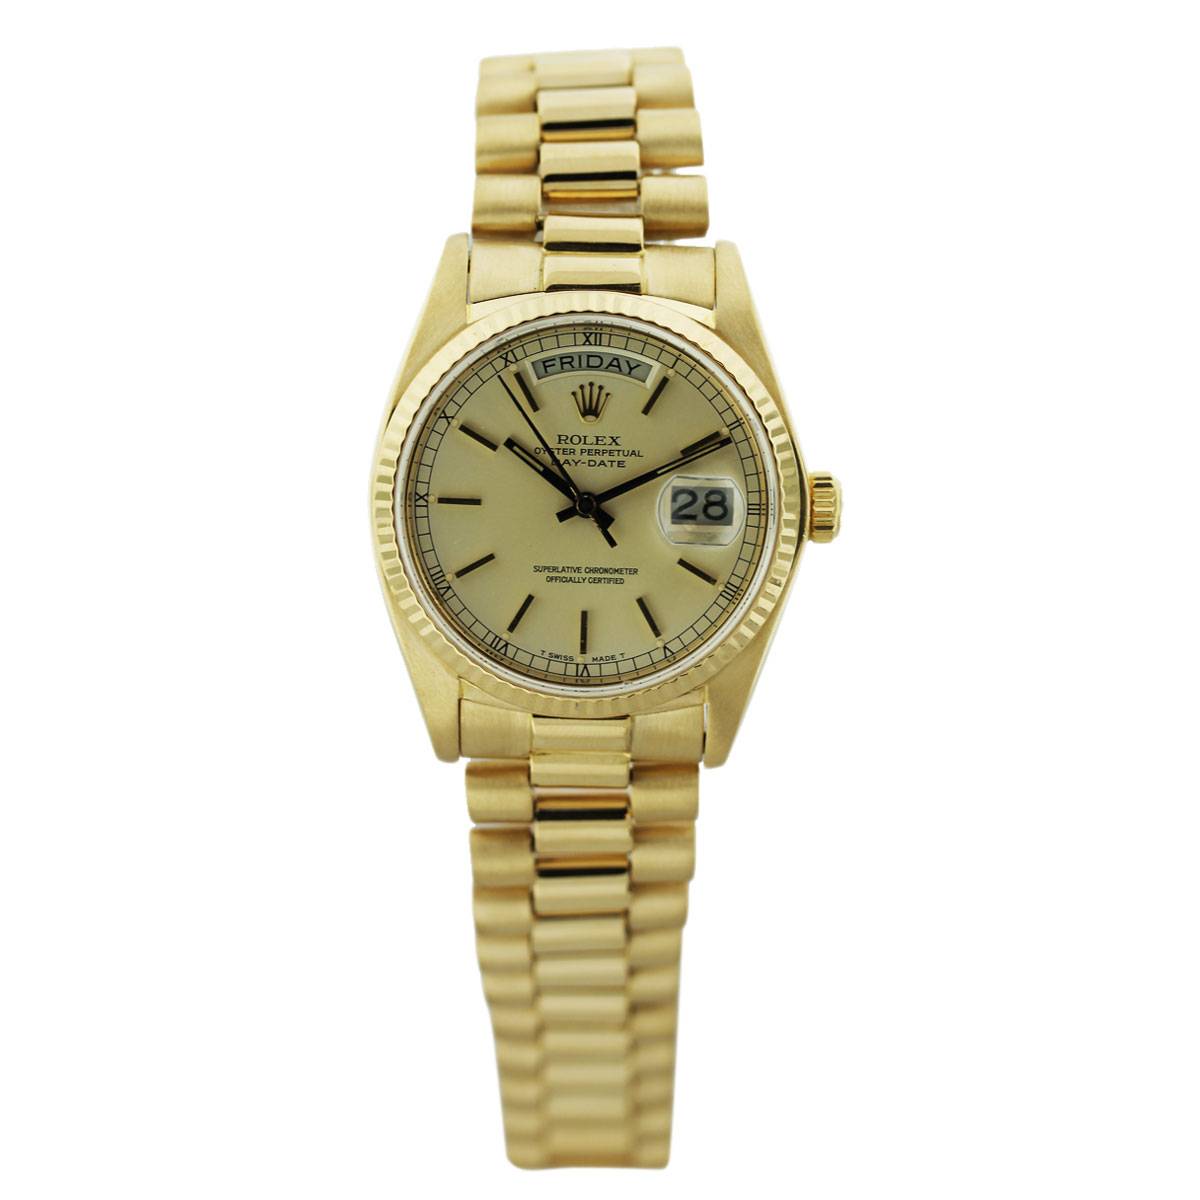 18k Yellow Gold Rolex 18038 Watch, pre owned rolex day date, rolex presidential